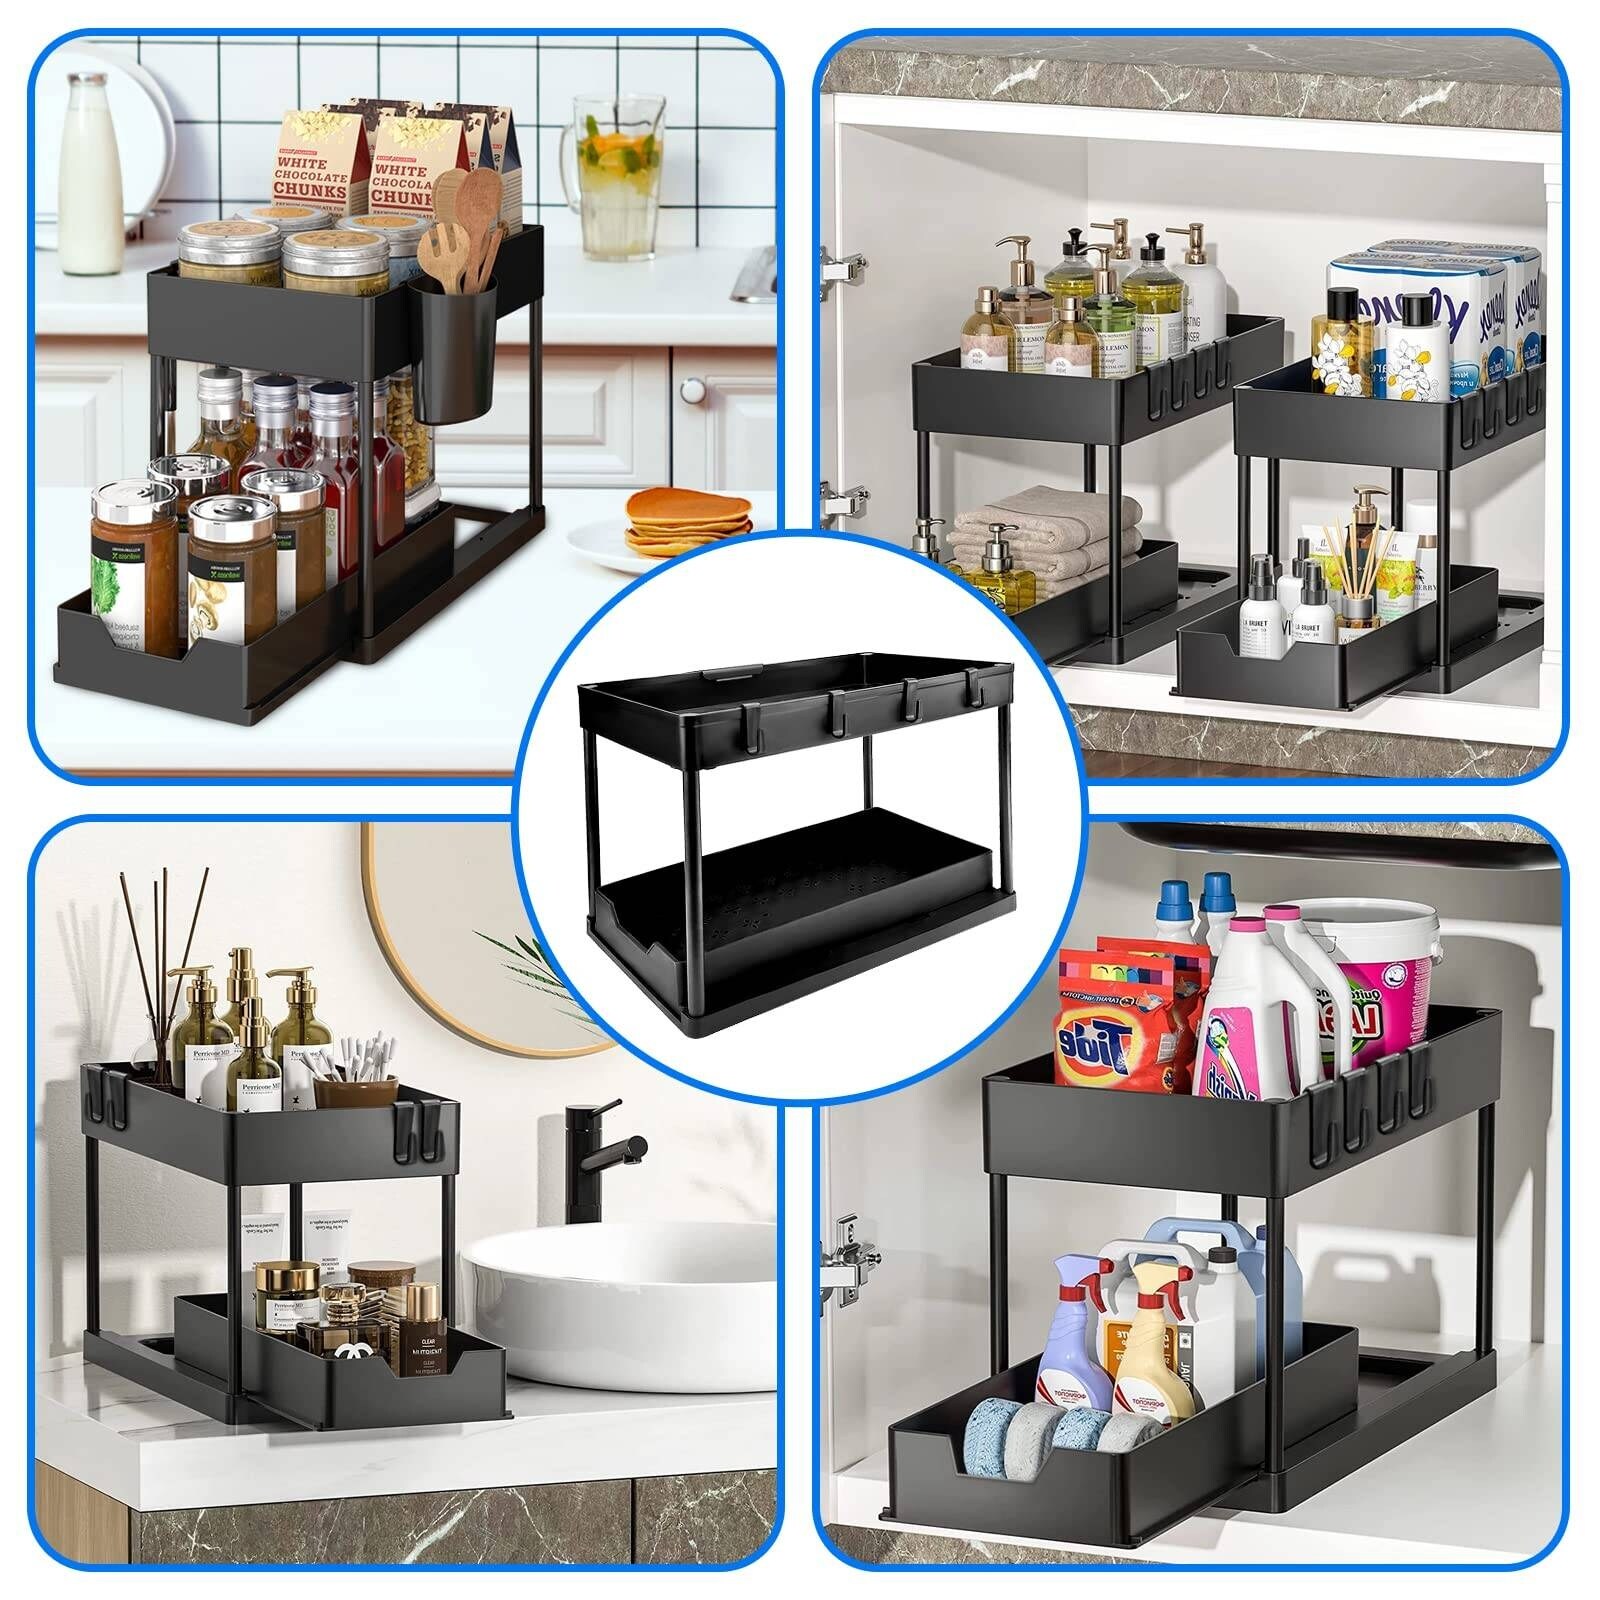 https://ak1.ostkcdn.com/images/products/is/images/direct/75c489abe40cf20dce3c1f976d482426e1068a1e/2-Tier-Under-Sink-Organizer-with-Pull-Out-Sliding-Storage-Drawer-%28Set-of-2%29.jpg